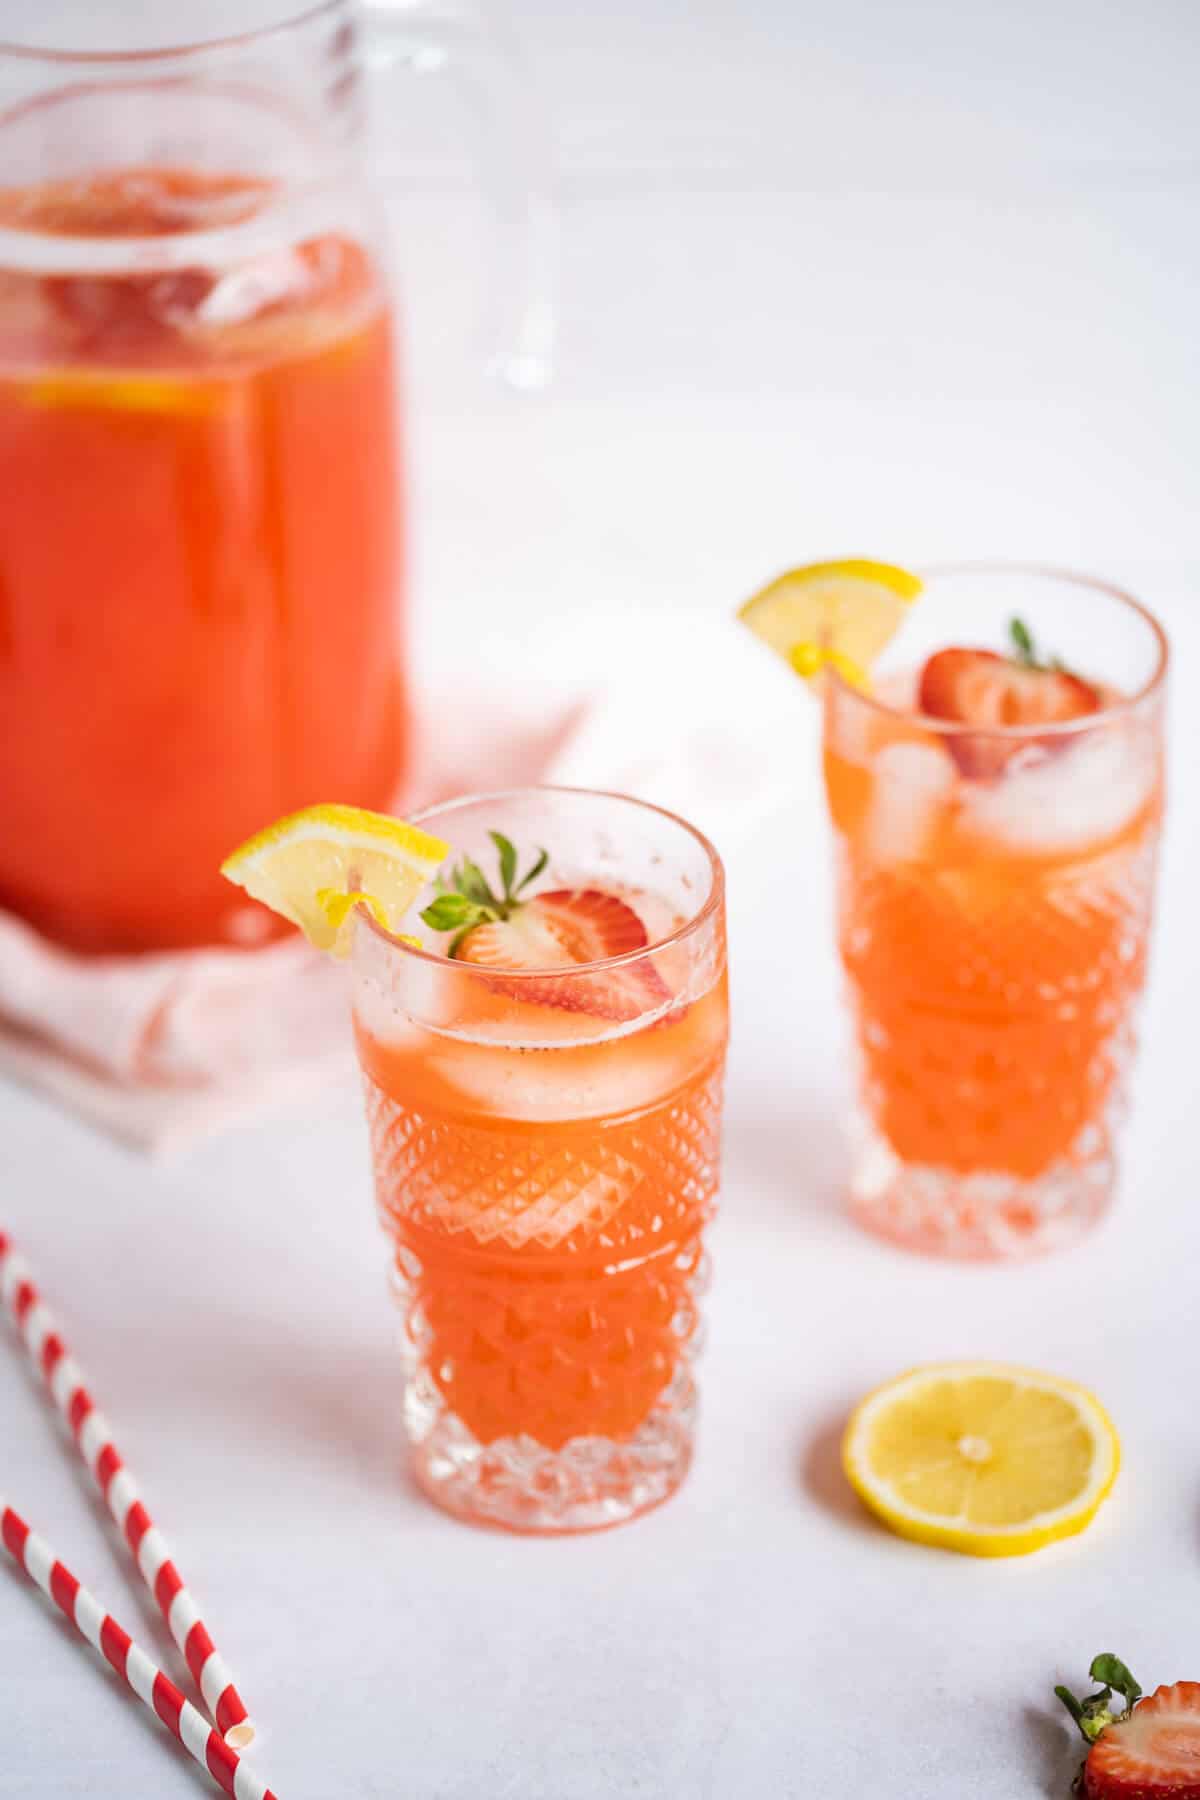 Two glasses of Strawberry Lemonade with a pitcher of lemonade behind them. The drinks are garnished with fresh strawberries and a lemon wedge. 2 straws are beside the glass.